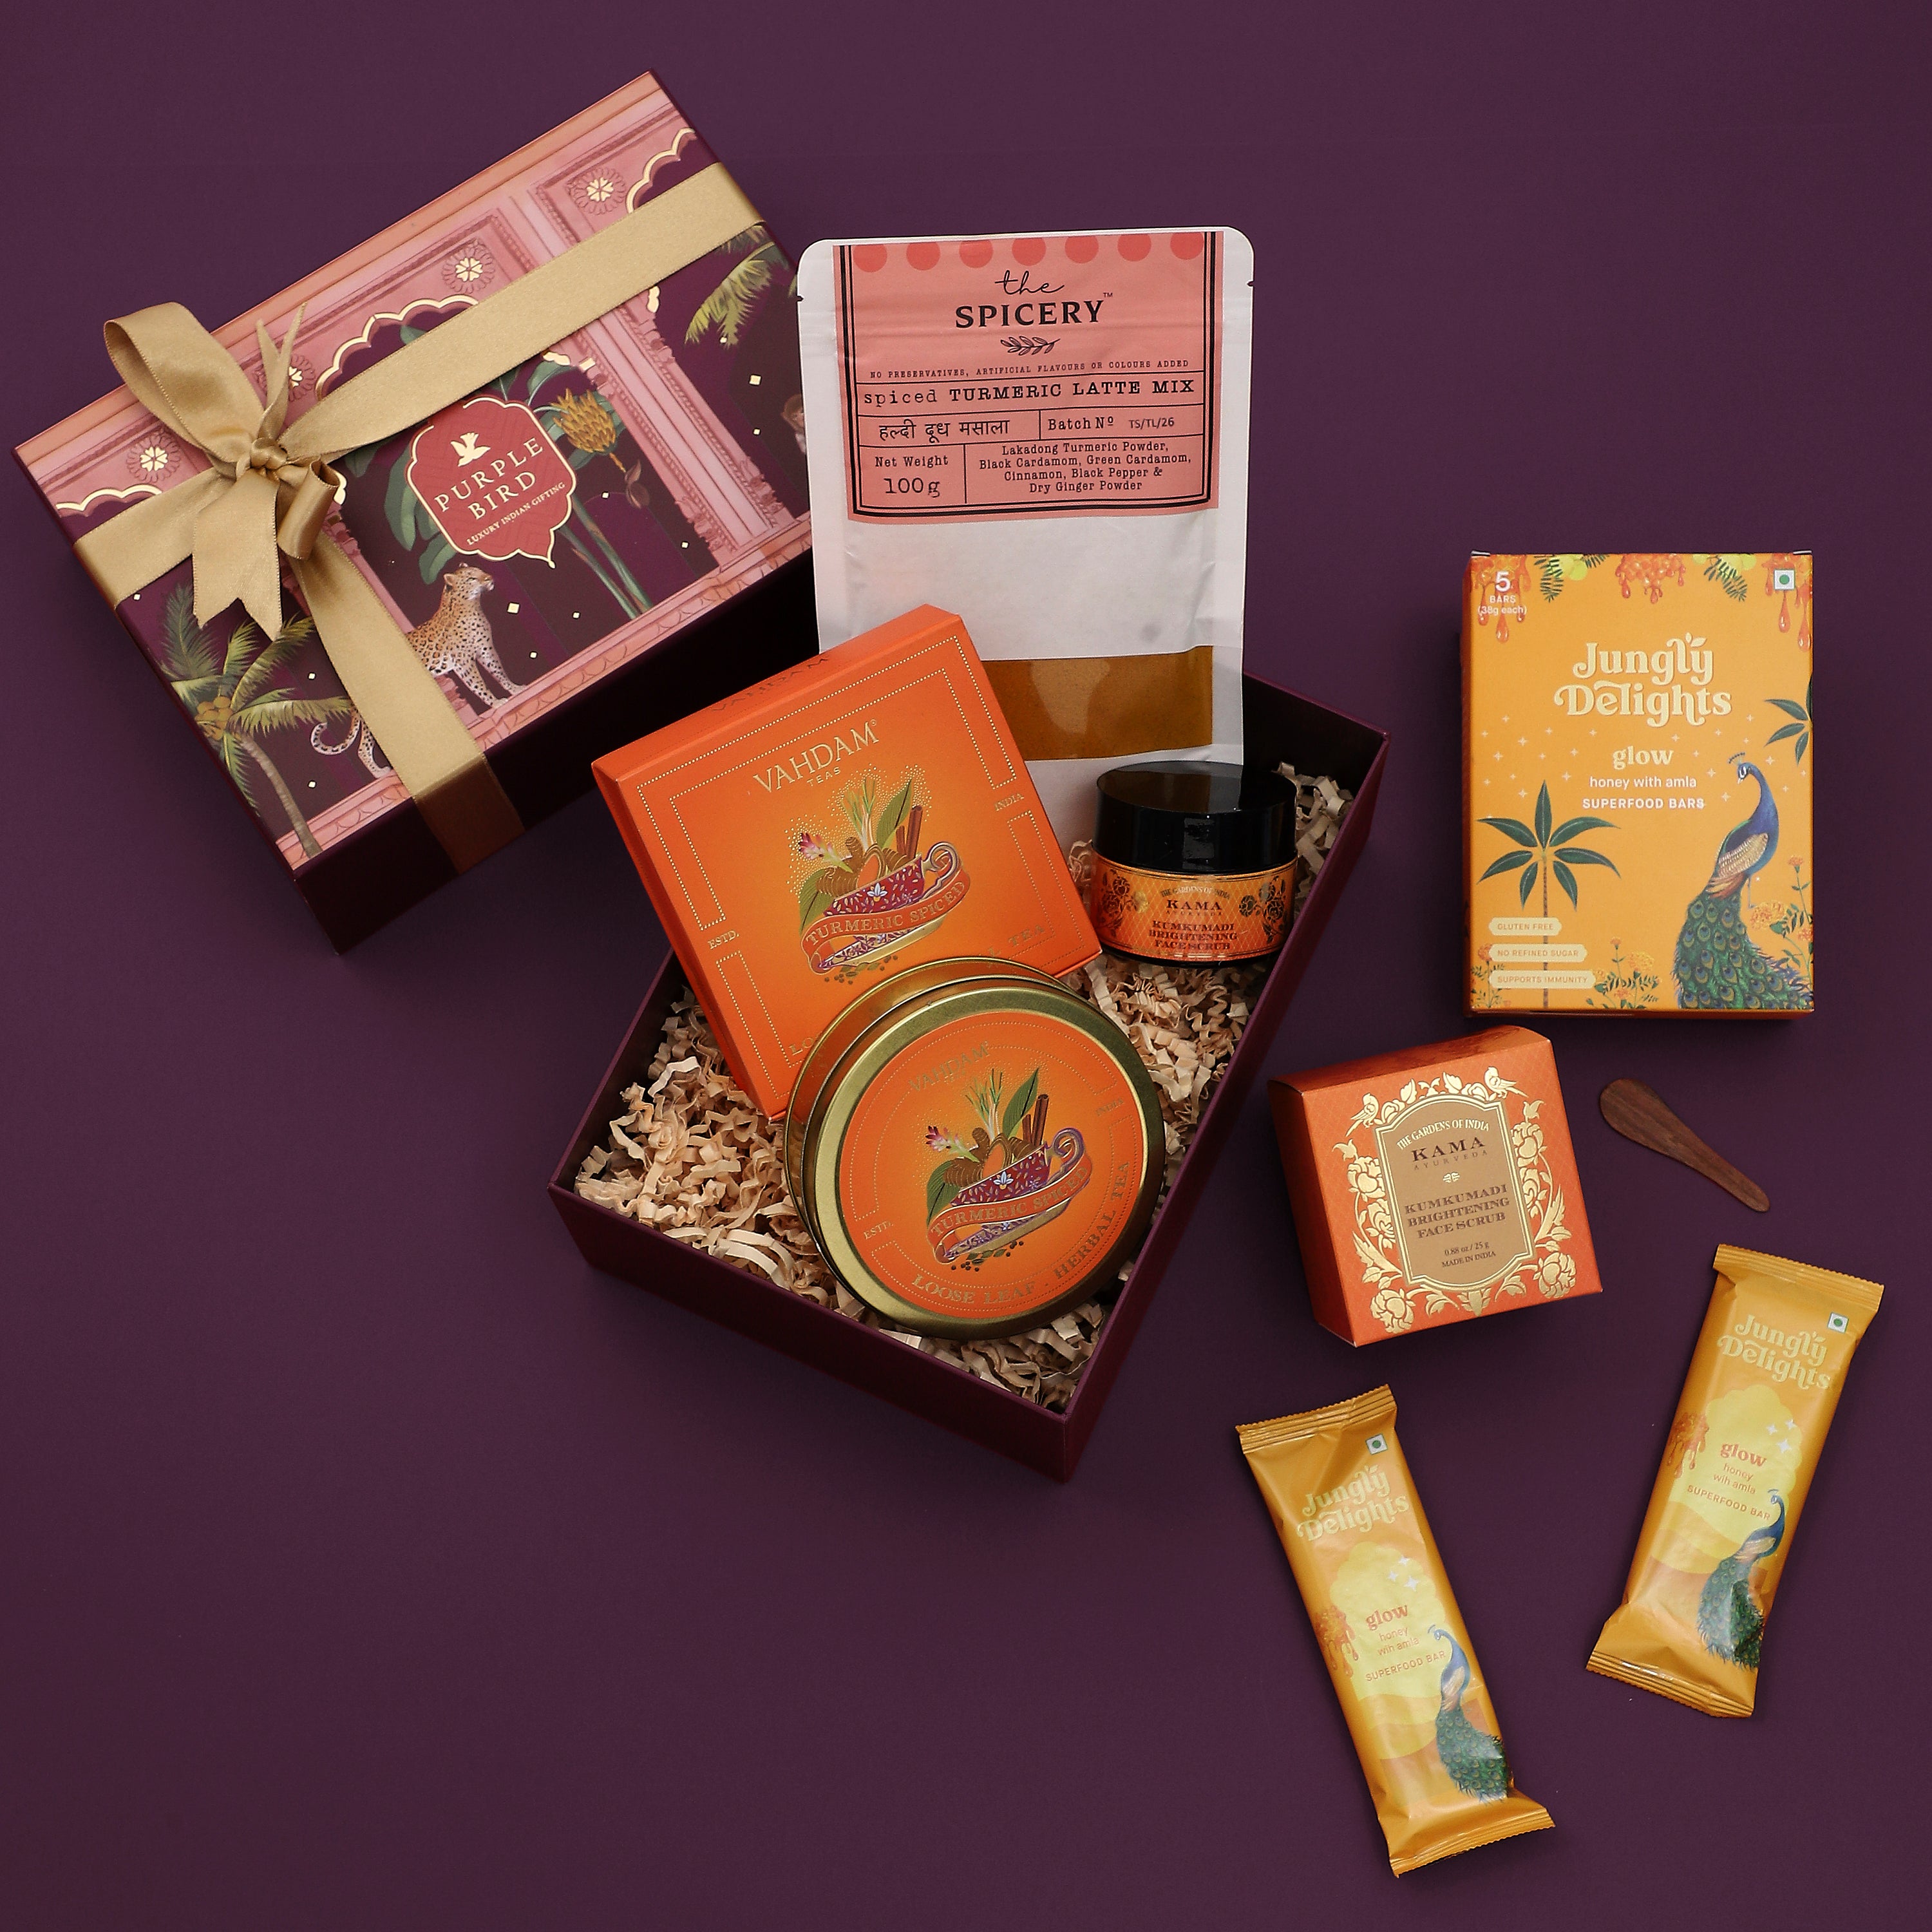 Angroos Luxury Diwali Gift Hampers With Spice Box, Handcrafted elephant,  Mysore pak and More | Diwali Gifts | Diwali gift hamper | Diwali gift box :  Amazon.in: Grocery & Gourmet Foods